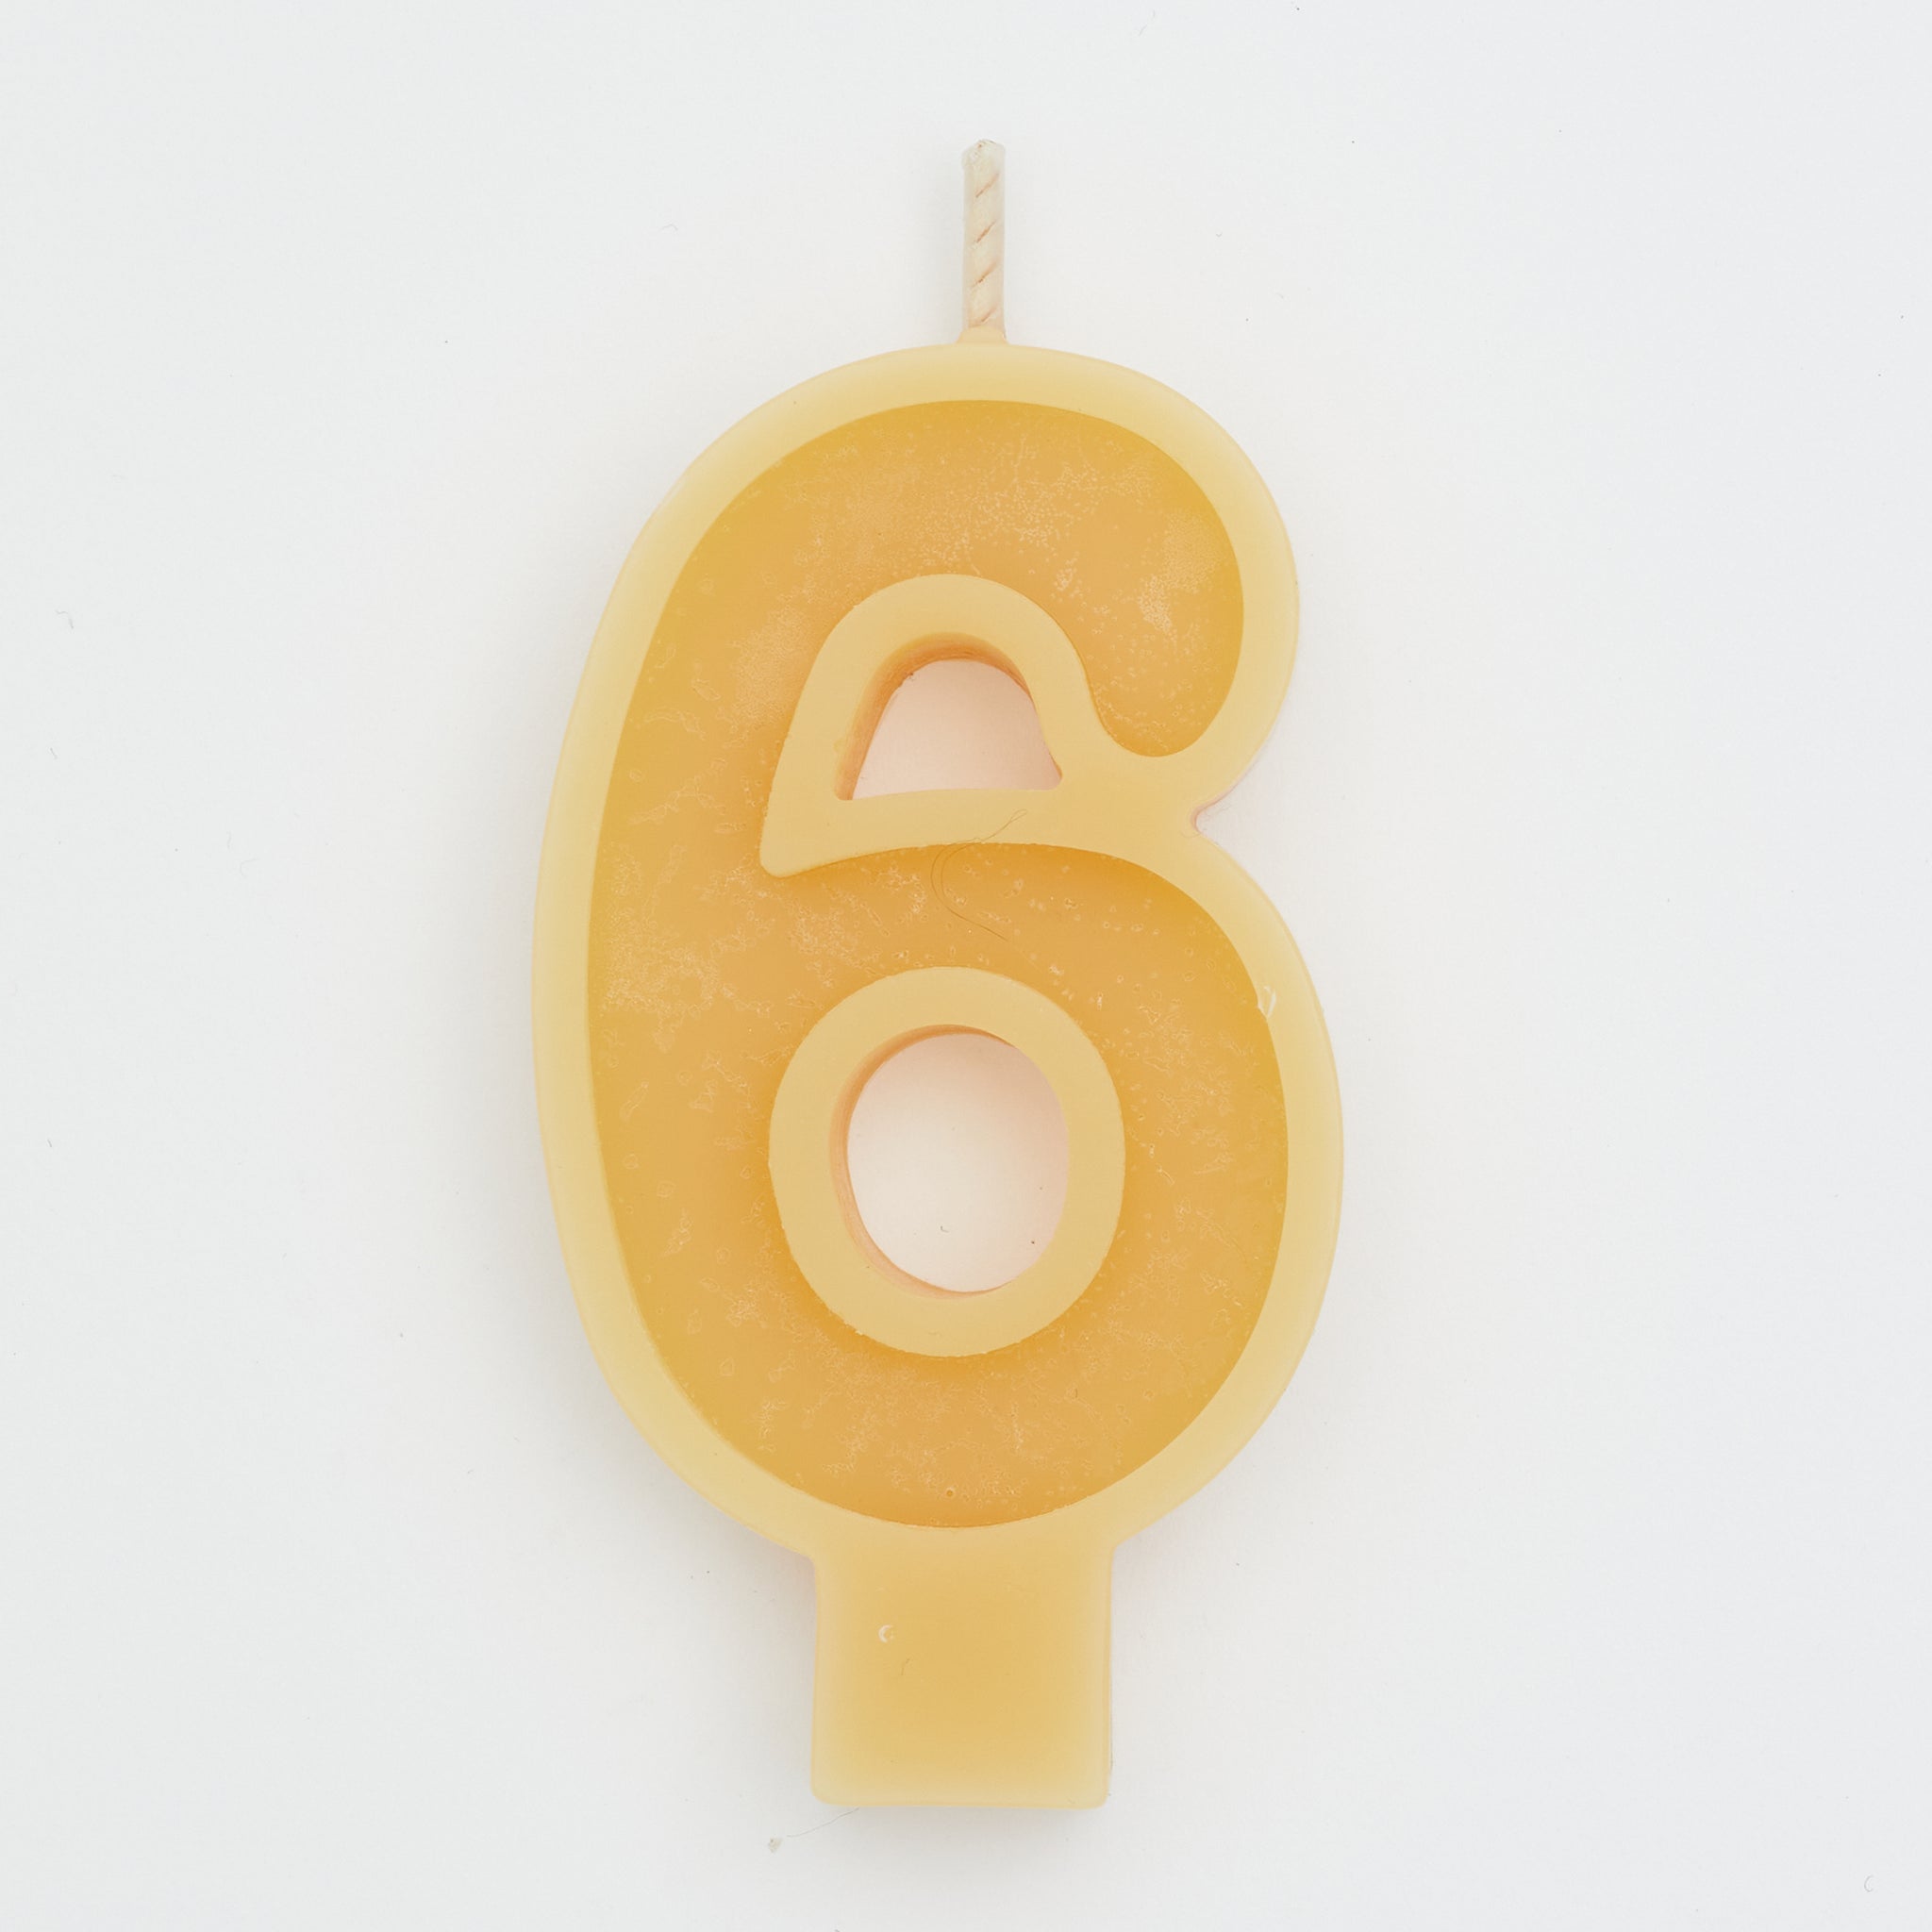 Blake & Mason Beeswax Celebration Number 6 Candles | made in Australia